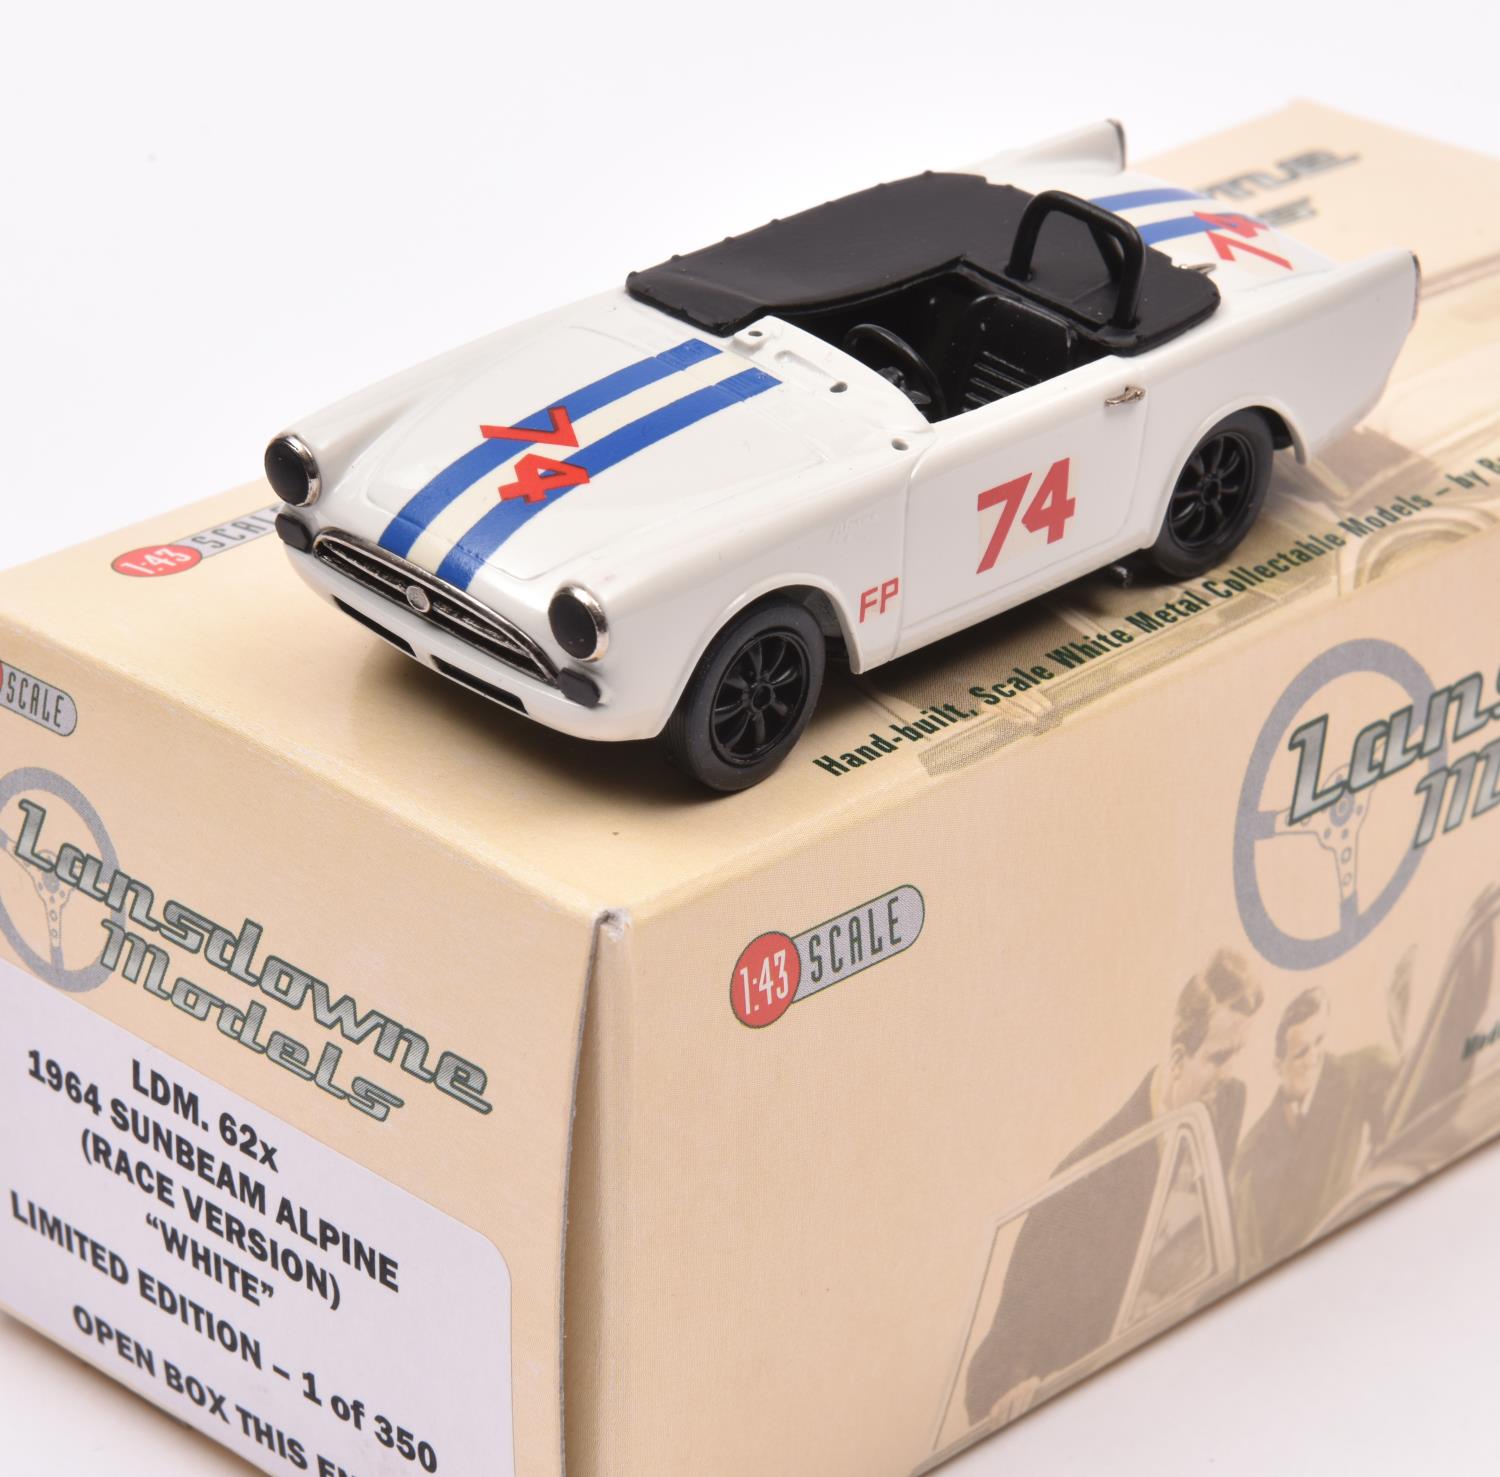 Lansdowne Models LDM.62x 1964 Sunbeam Alpine (race version) in white.Limited Edition 1of 350. Boxed.